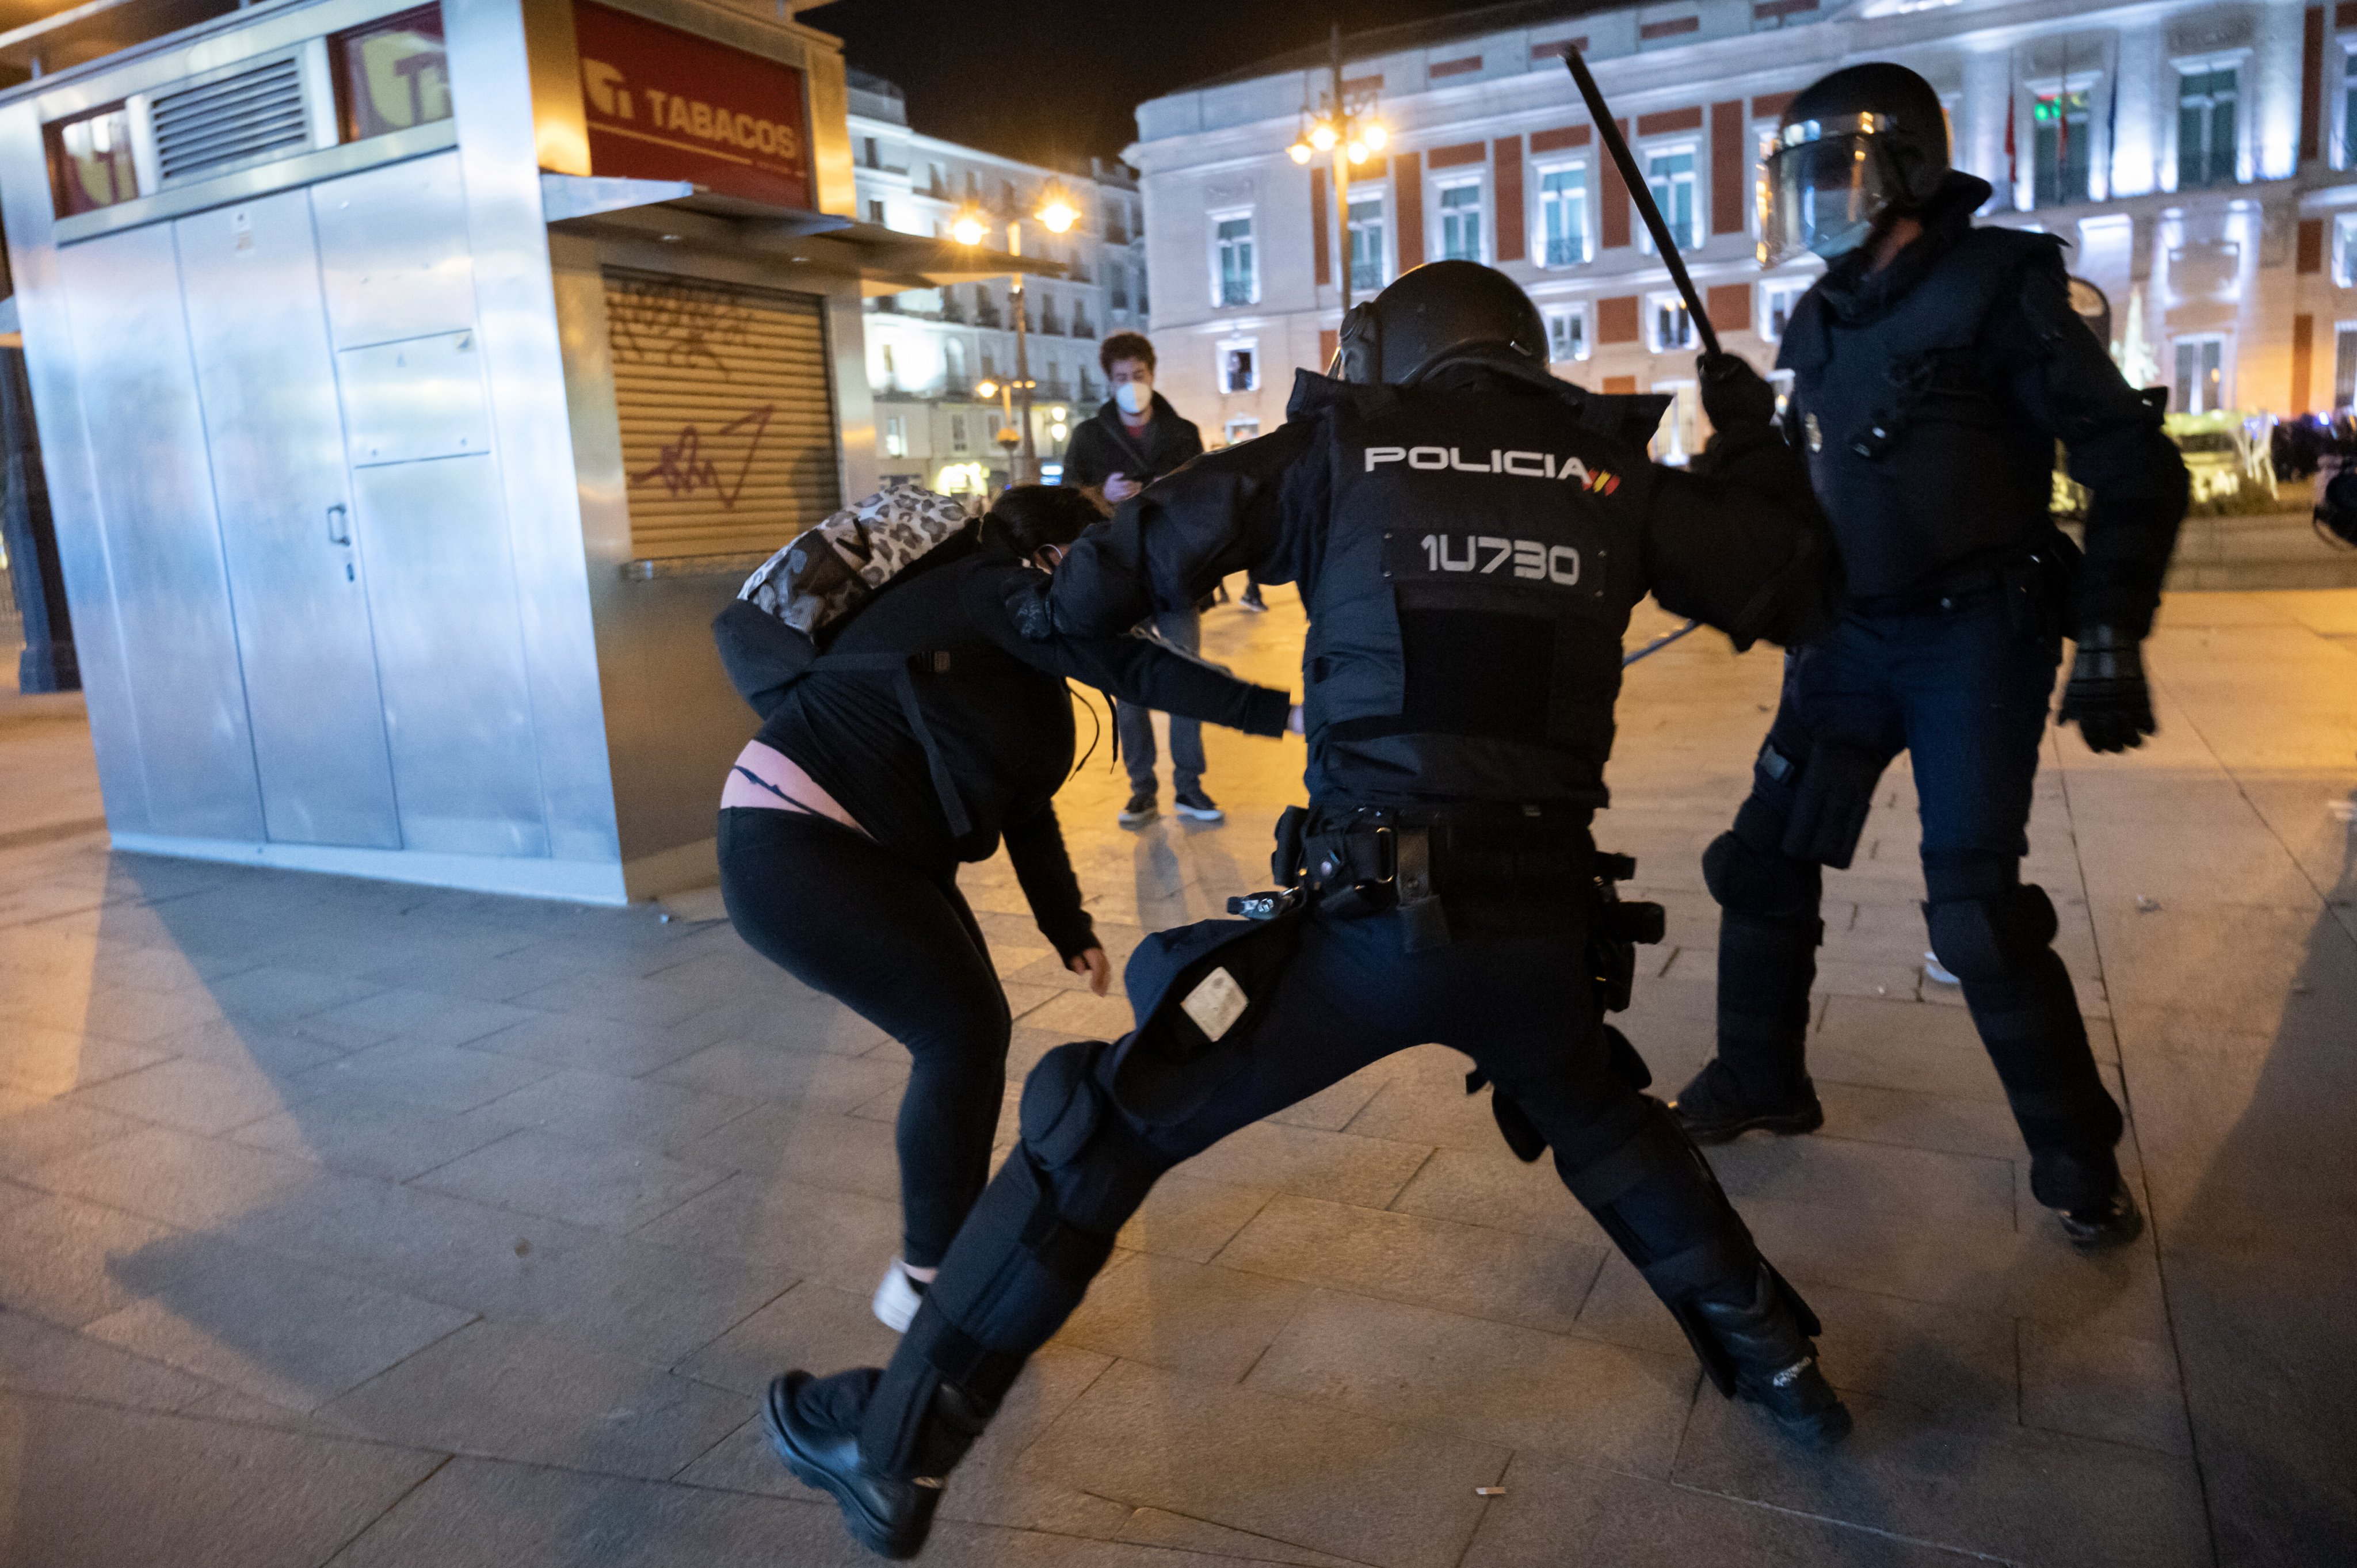 Riot police beating a woman during clashes in a